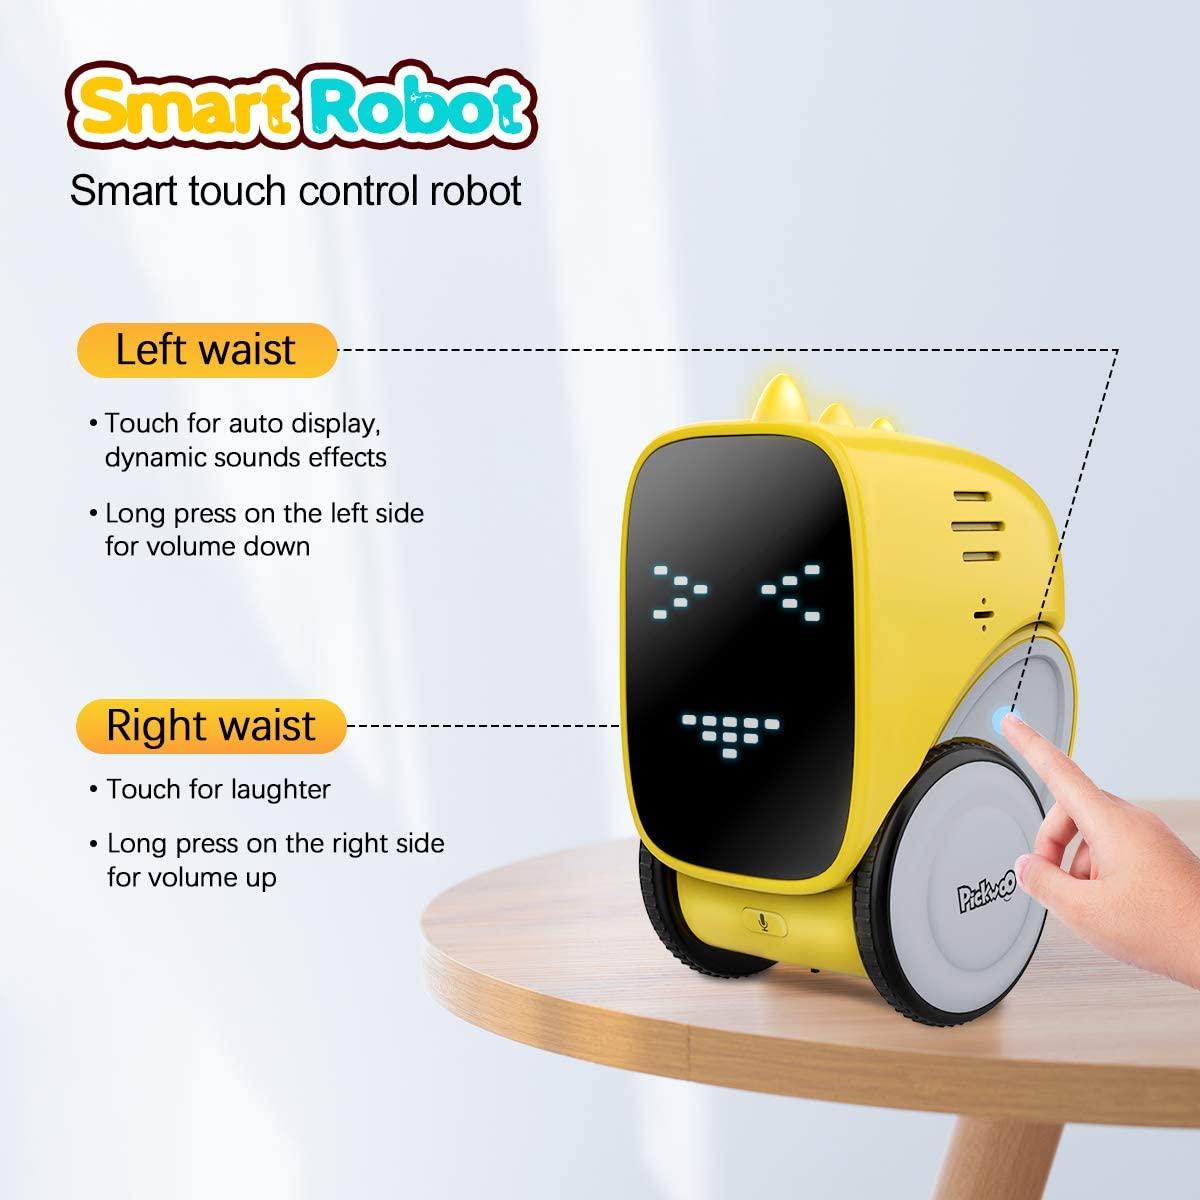 Pickwoo-Smart-Touch-Control-Robot-Singing-Dancing-Voice-Gesture-Control-Robot-Toy-1895678-1